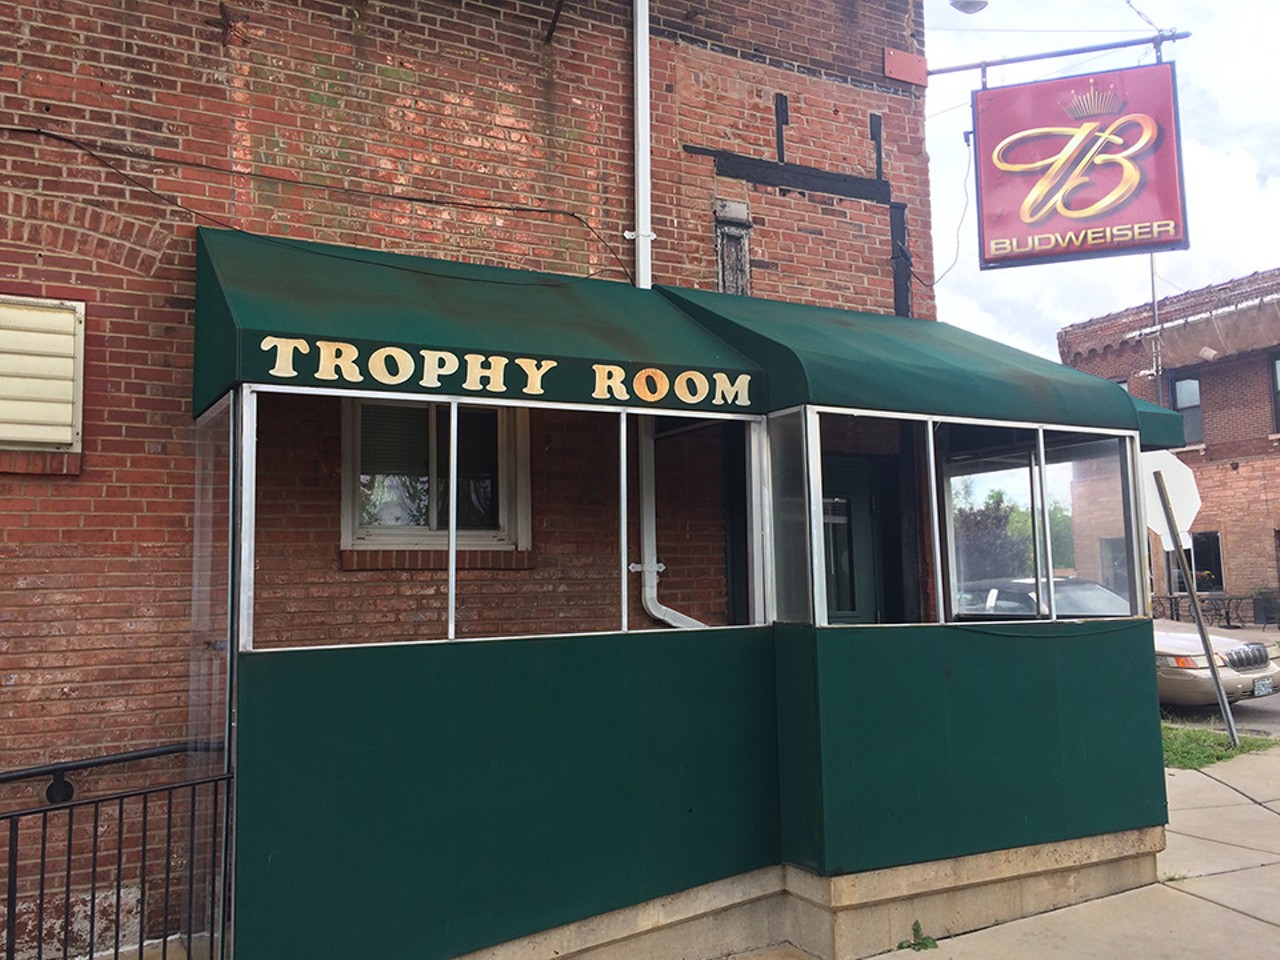 Trophy Room
(5099 Arsenal Street; 314-664-4810)
Opens at 6 a.m. Monday through Saturday; Opens at 11 a.m. on Sunday
Southwest Garden watering hole the Trophy Room is the stuff of legend, and no small part of its mythology is the fact that it&#146;s open for 21 hours nearly every day. The storefront bar starts serving suds at 6 a.m. and also offers a pool table and Keno and Golden Tee and everything else that makes a dive bar great. 
Photo credit: Daniel Hill